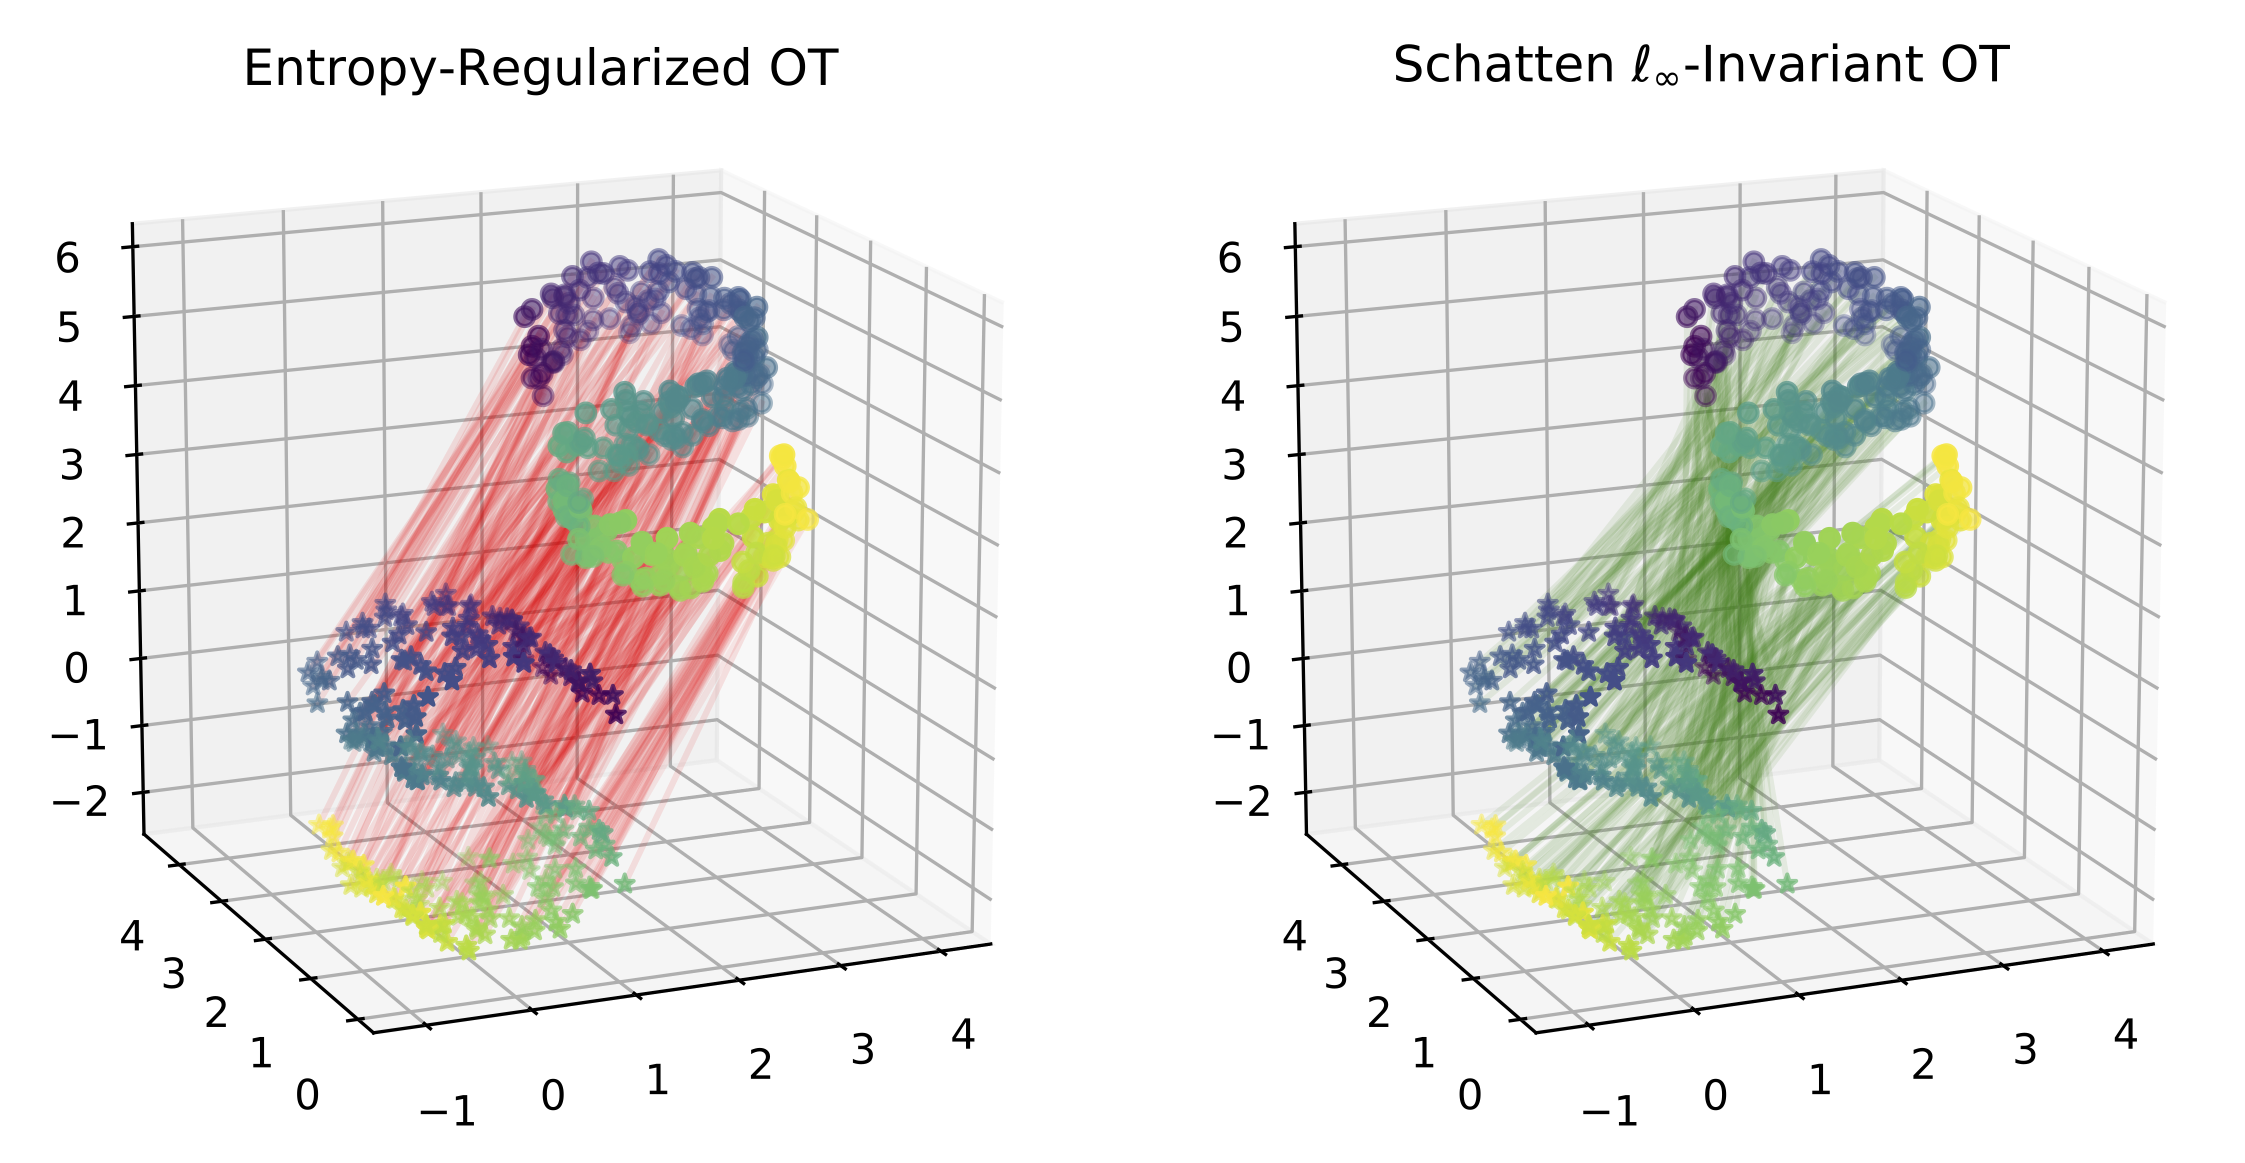 Endowing the optimal transport problem with invariance to global transformations (rotations in this case) allows it to recover correspondences in cases where the traditional formulation would not.